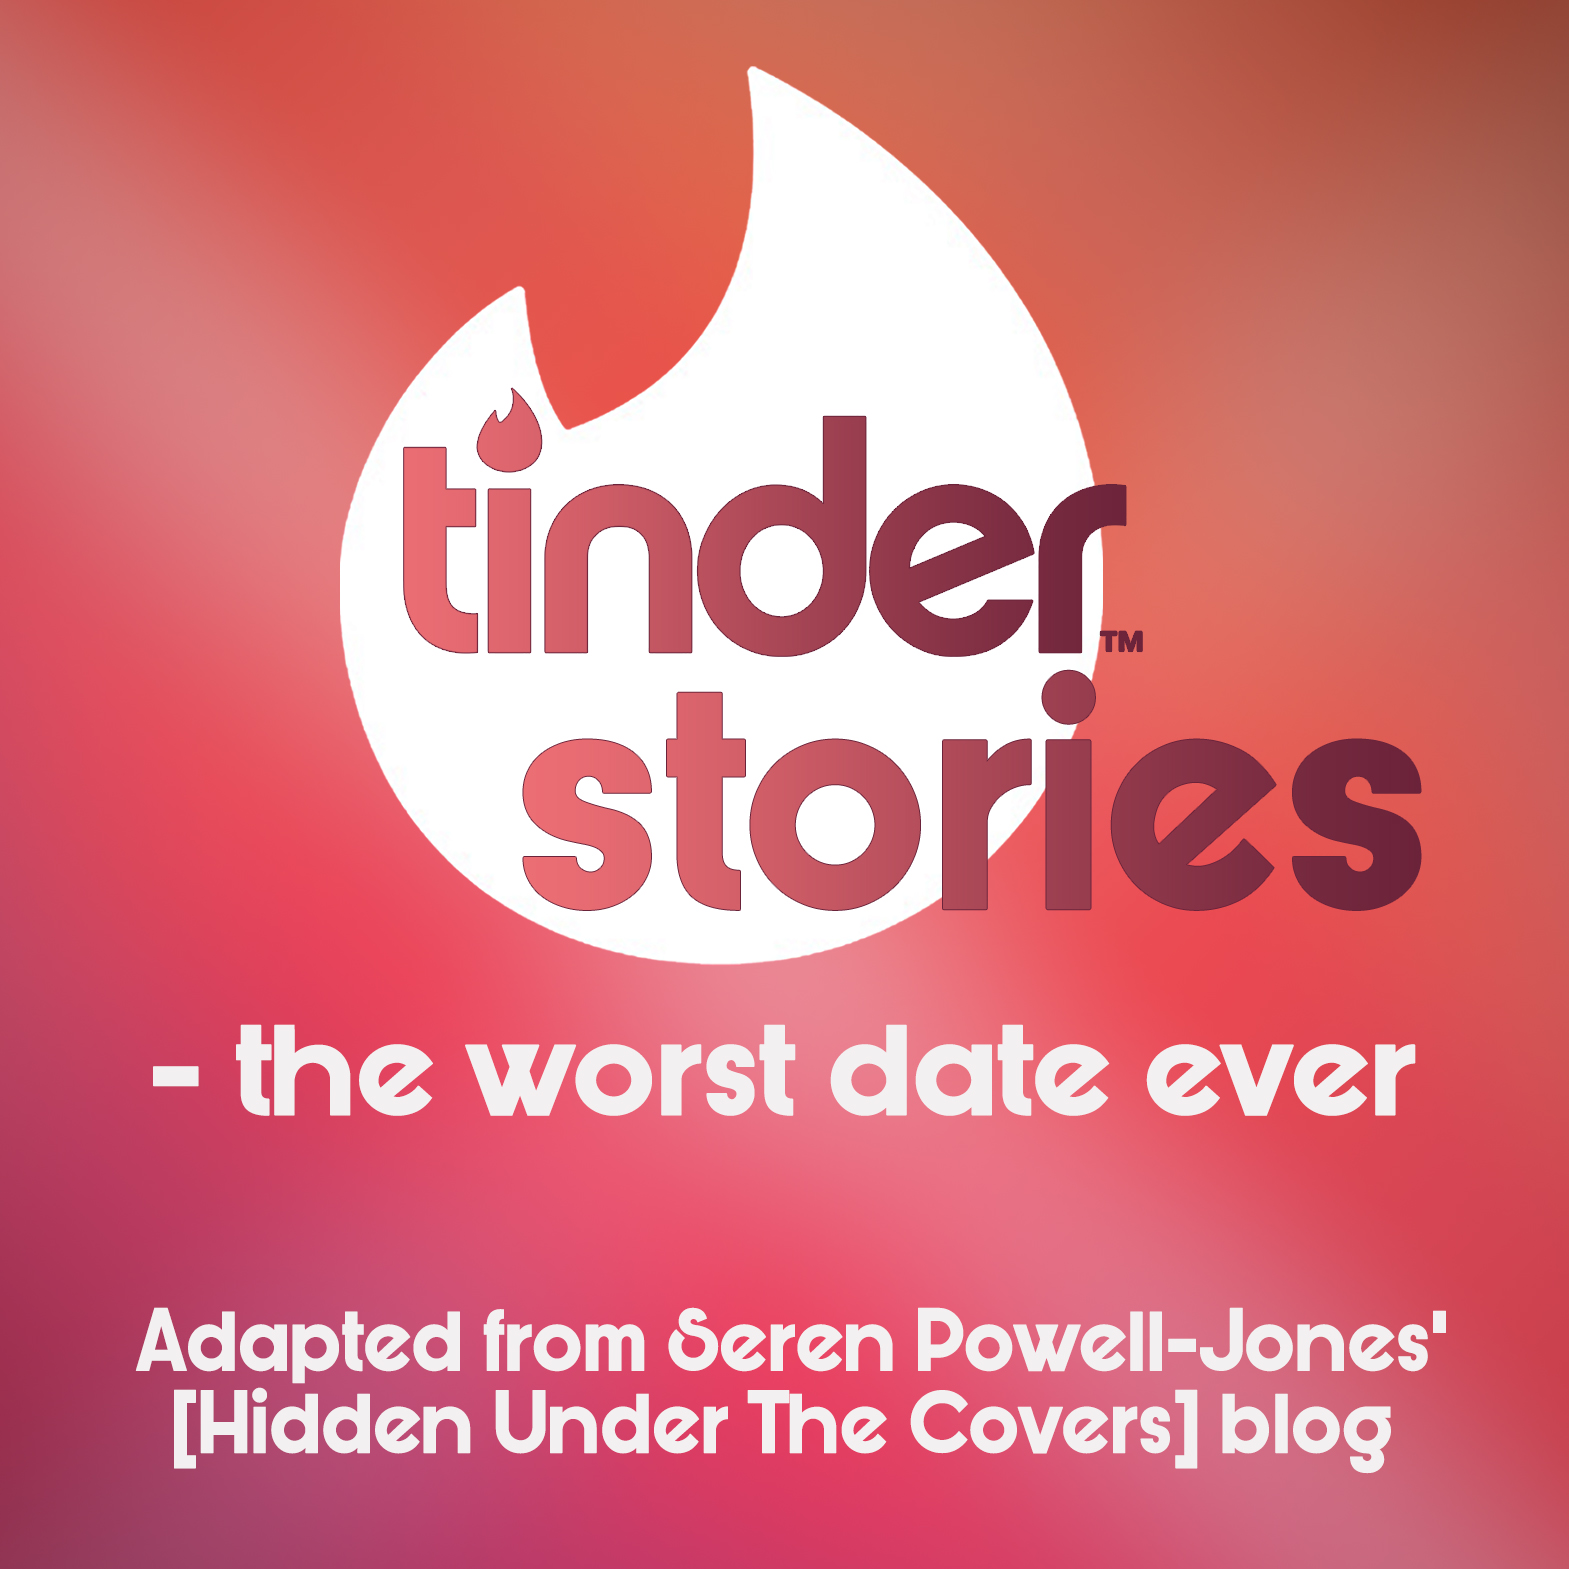 Tinder Stories - The Worst Date Ever